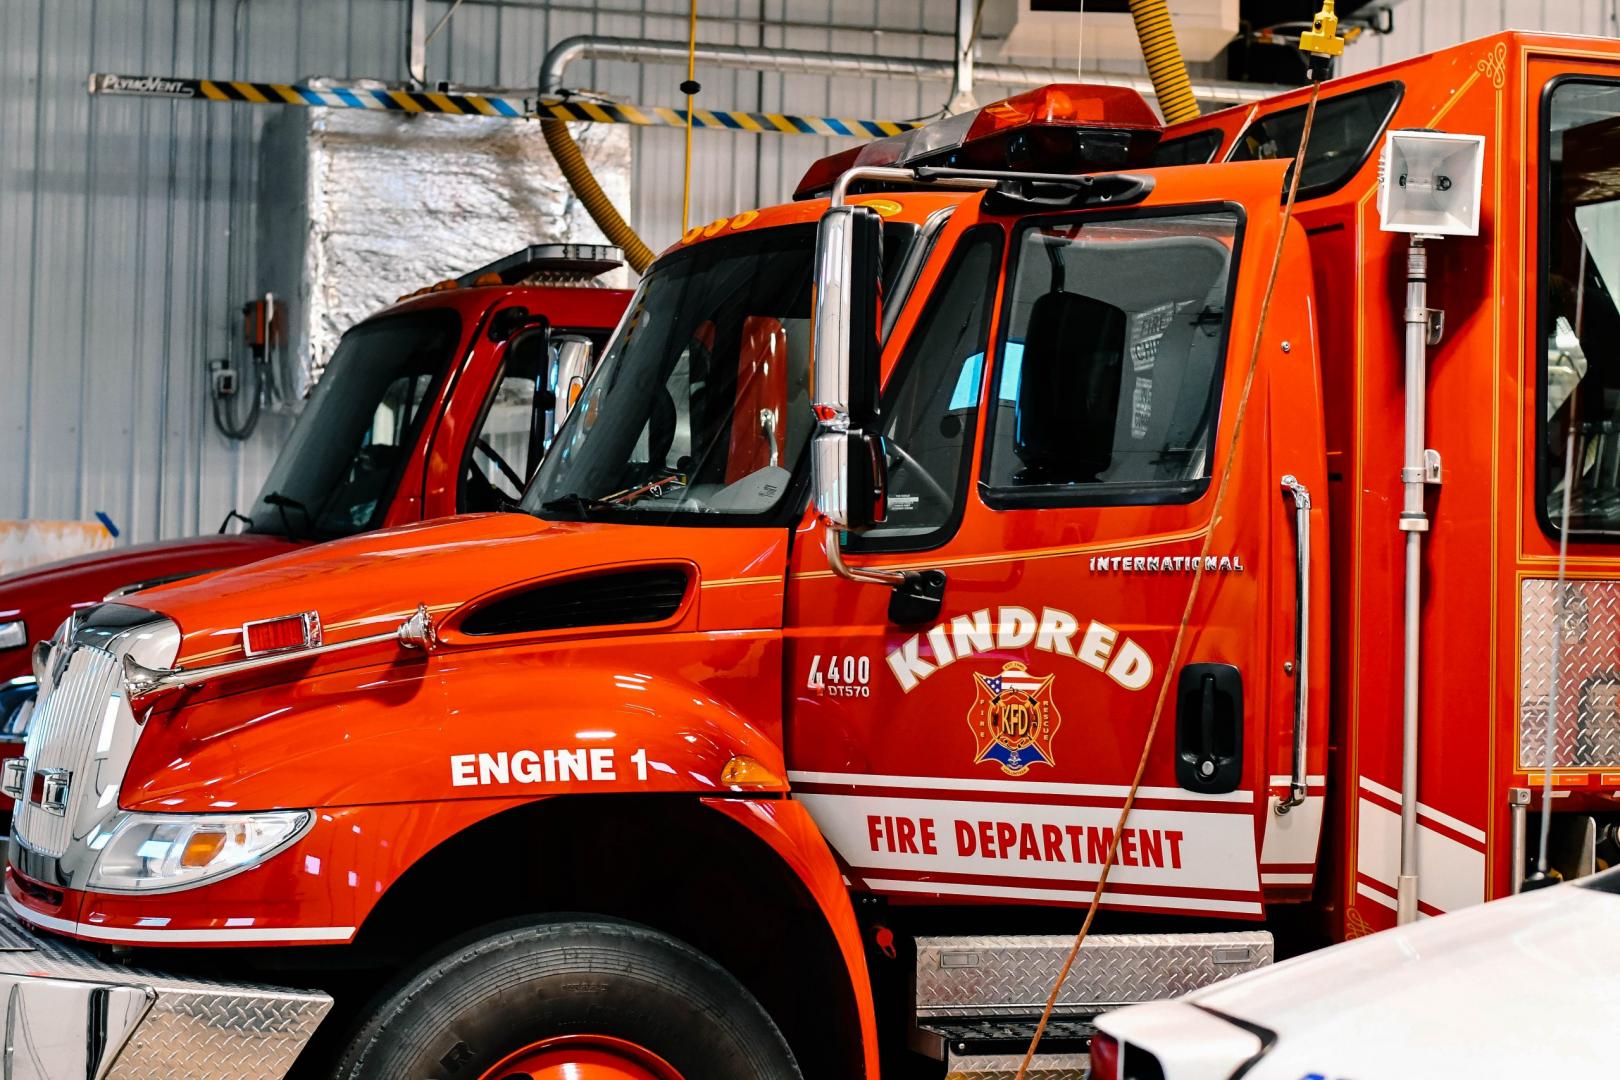 Kindred Fire Department Truck